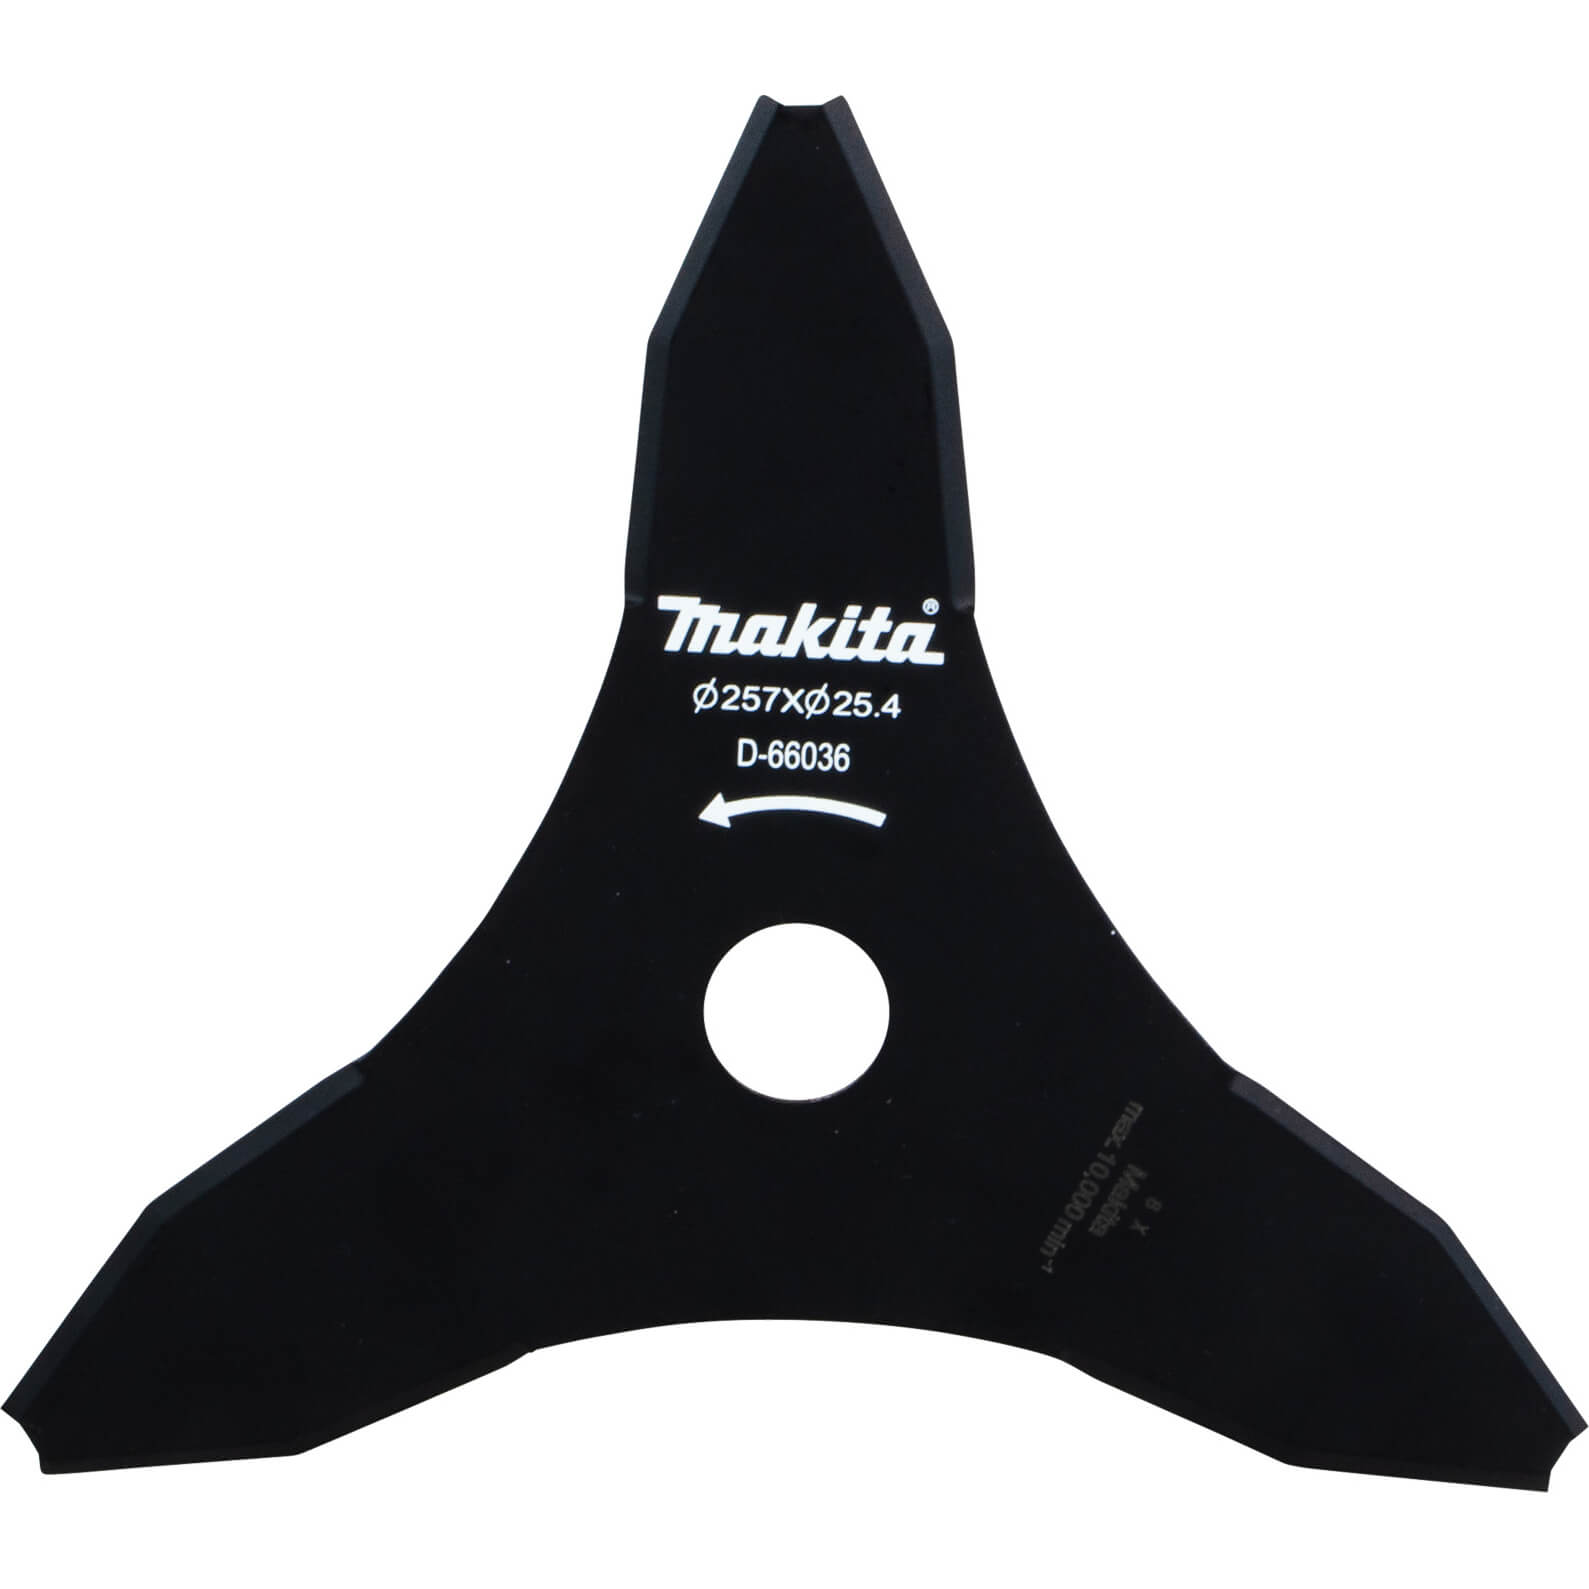 Photos - Other Components Makita Brush Cutter Tri Blade 257mm for  Grass Cutters D-66036 